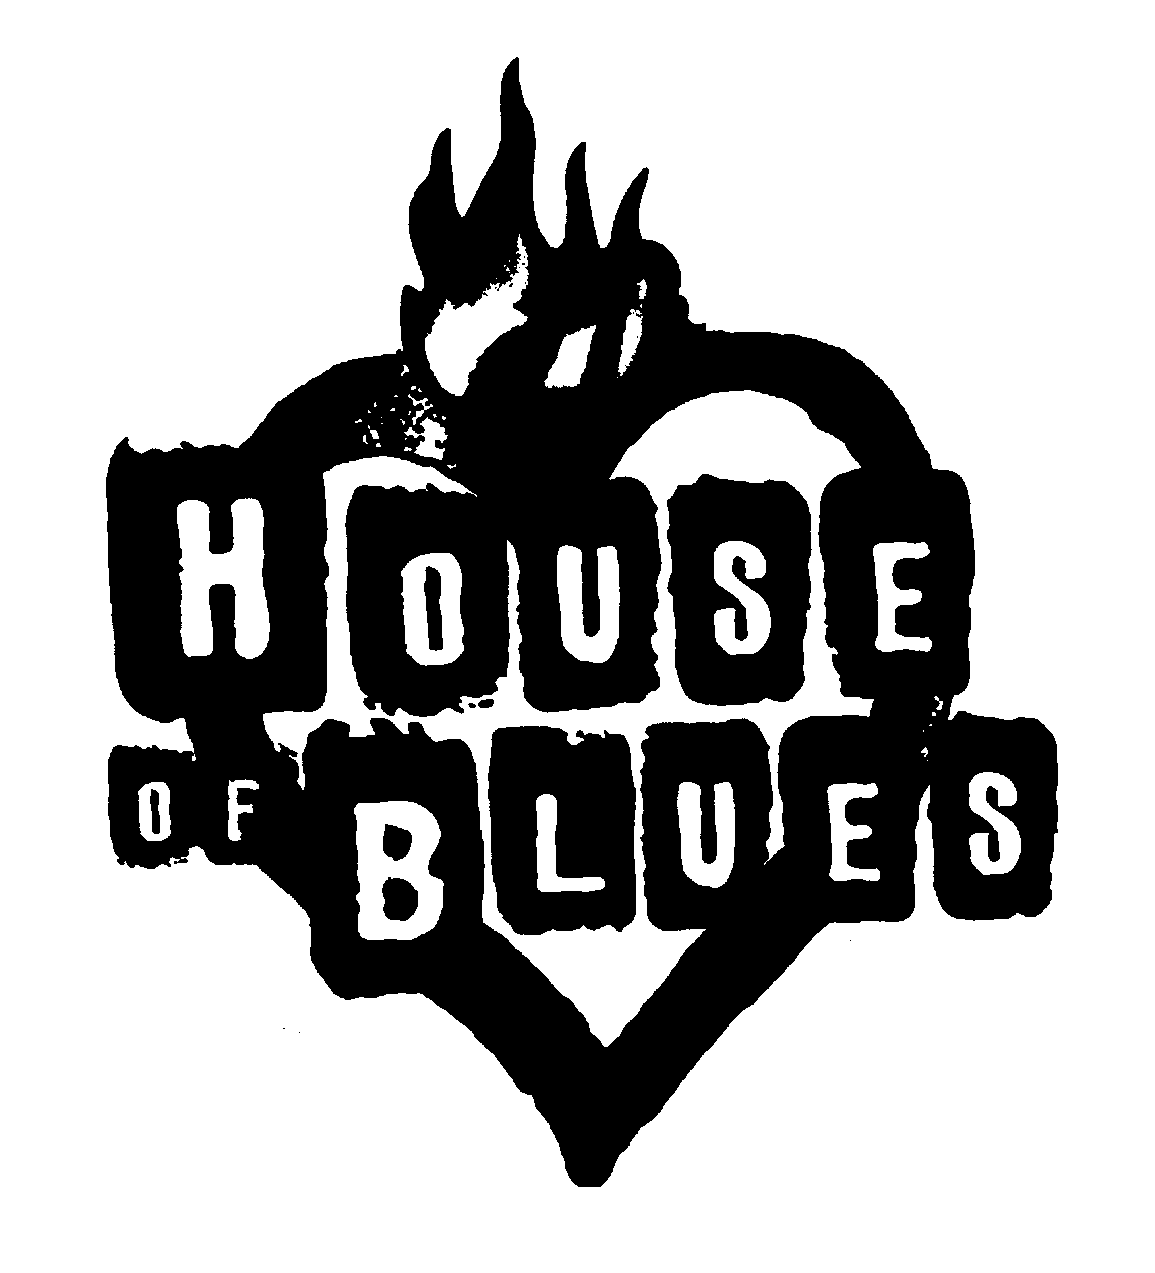 HOUSE OF BLUES